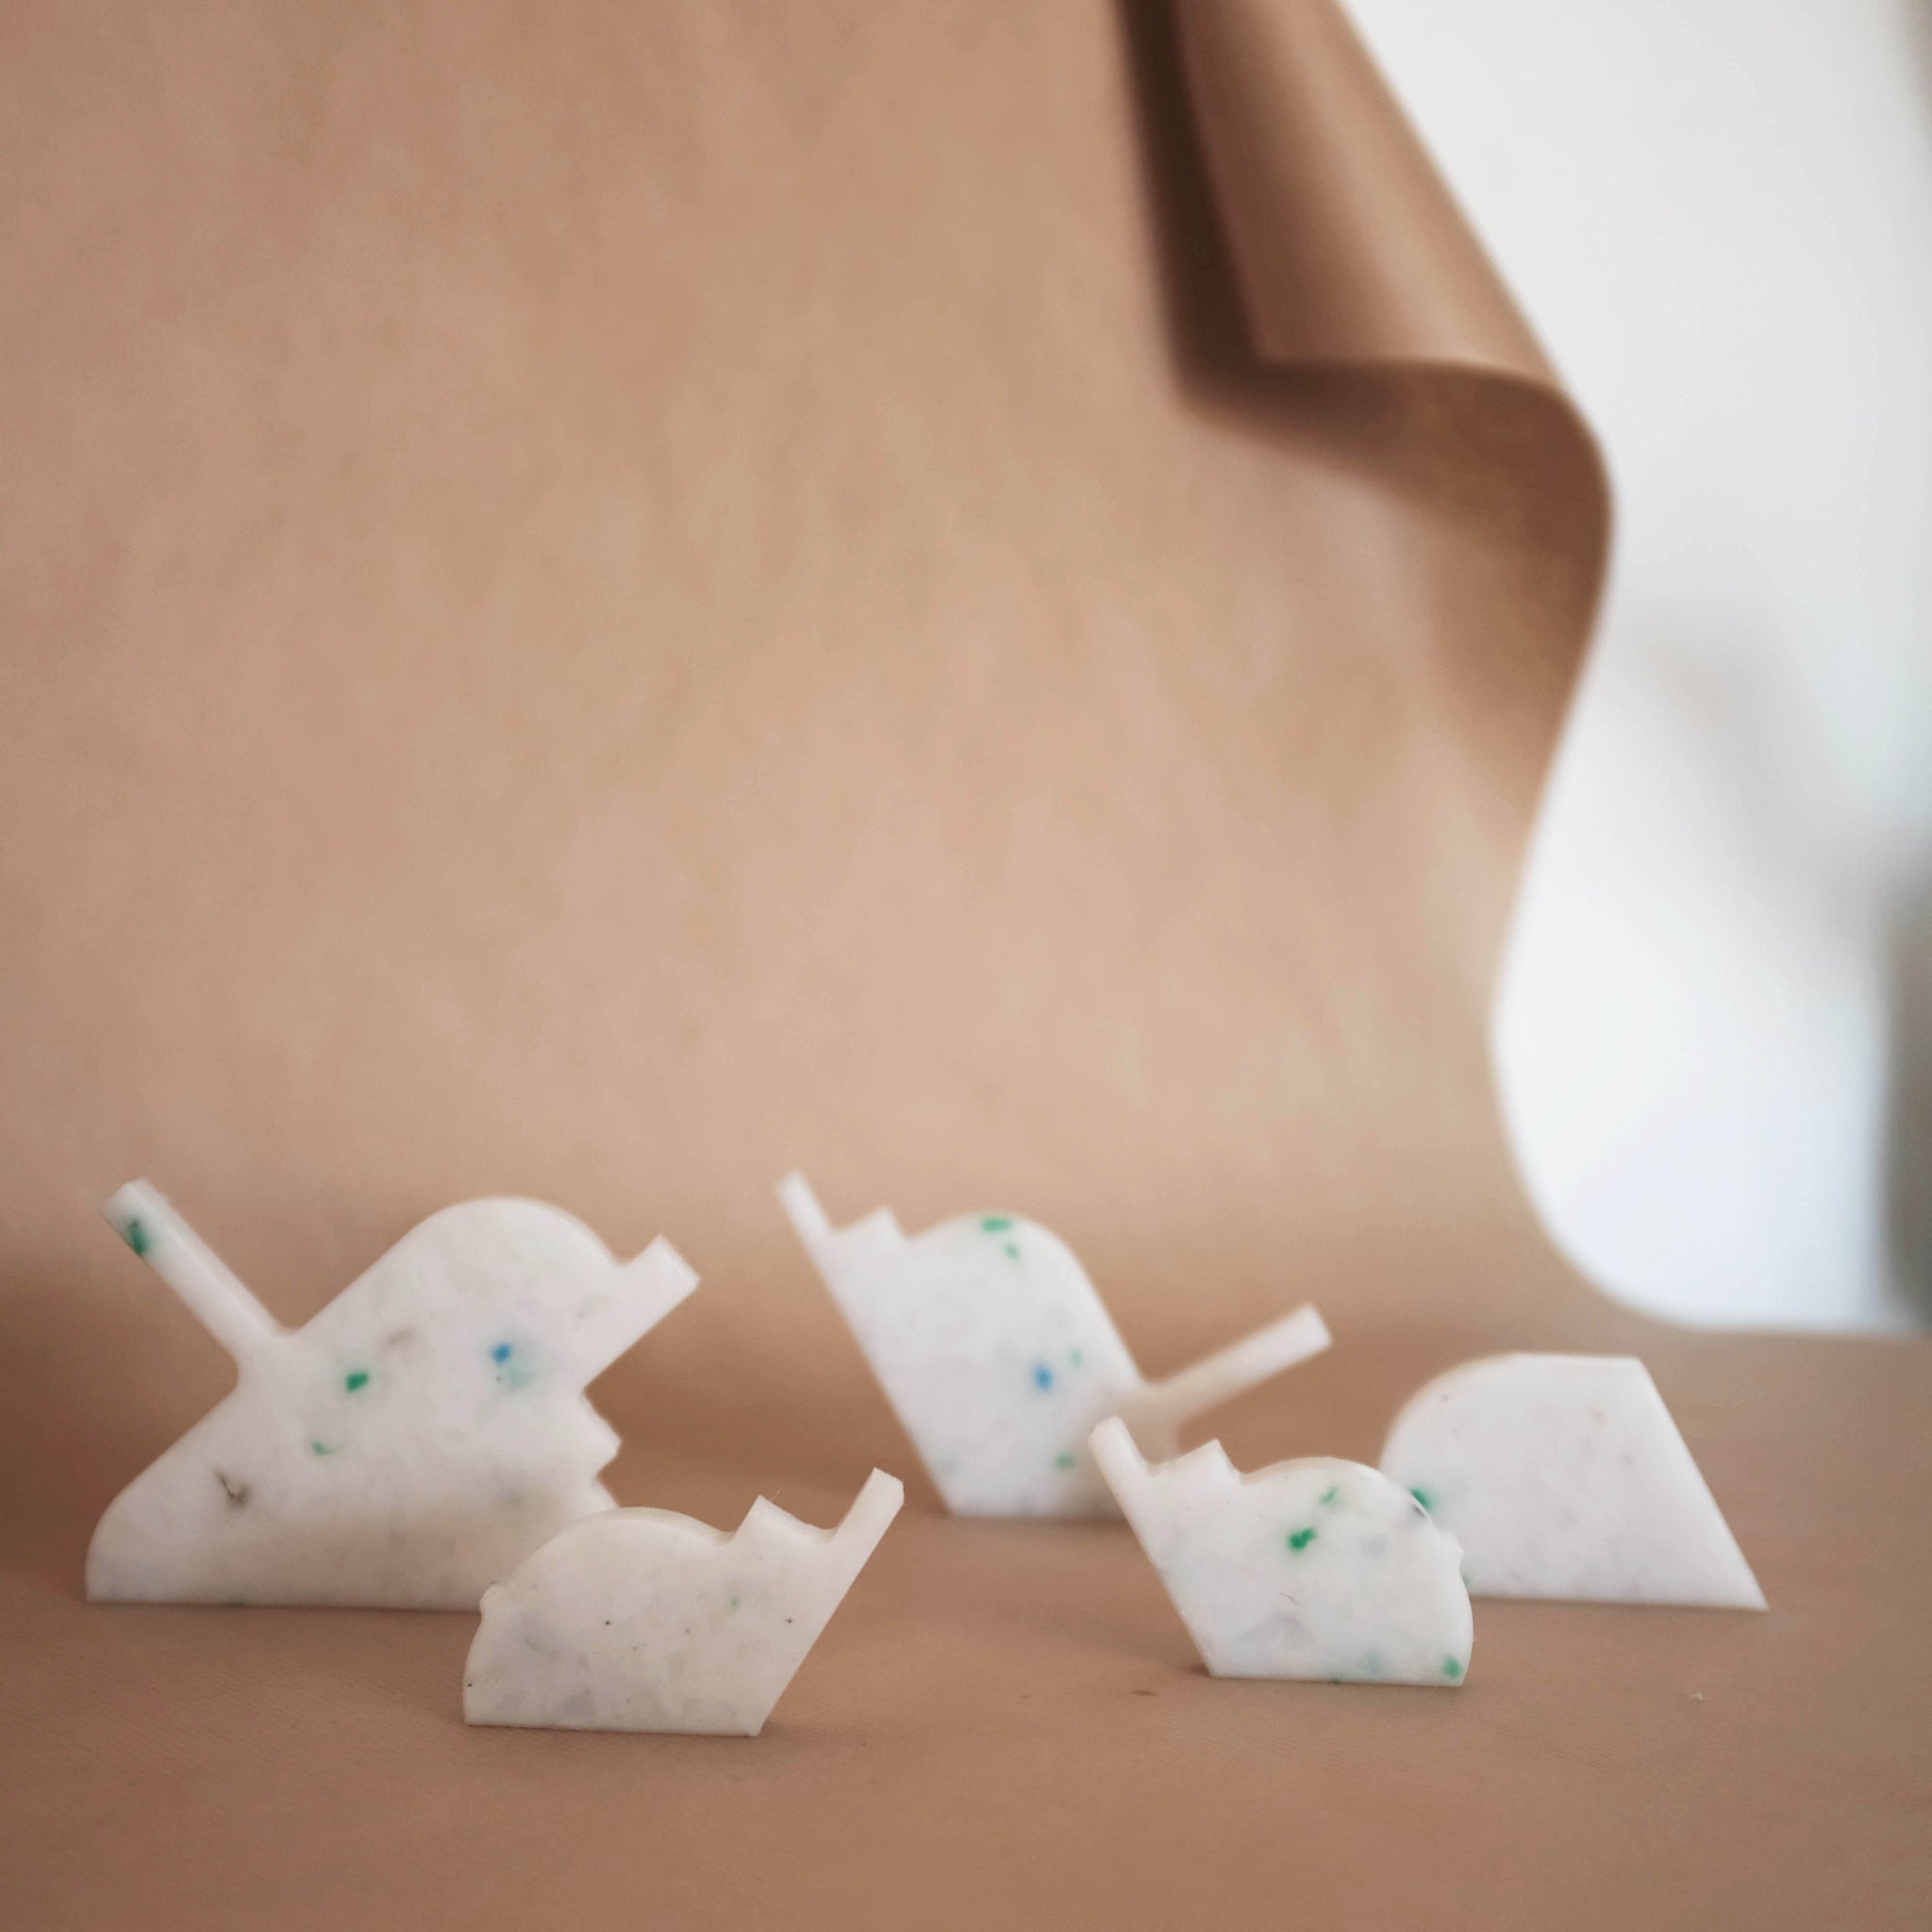 WHITE WALL HOOKS FROM RANDOM PRODUCTION CUT OFFS BY THE MINIMONO PROJECT - BRAND FOR ECO FRIENDLY - PLAYFUL - MULTI FUNCTIONAL - SUSTAINABLE - HIGH QUALITY - DESIGN FURNITURE FROM RECYCLED PLASTIC FOR BOTH ADULT AND CHILDREN MADE IN BERLIN GERMANY